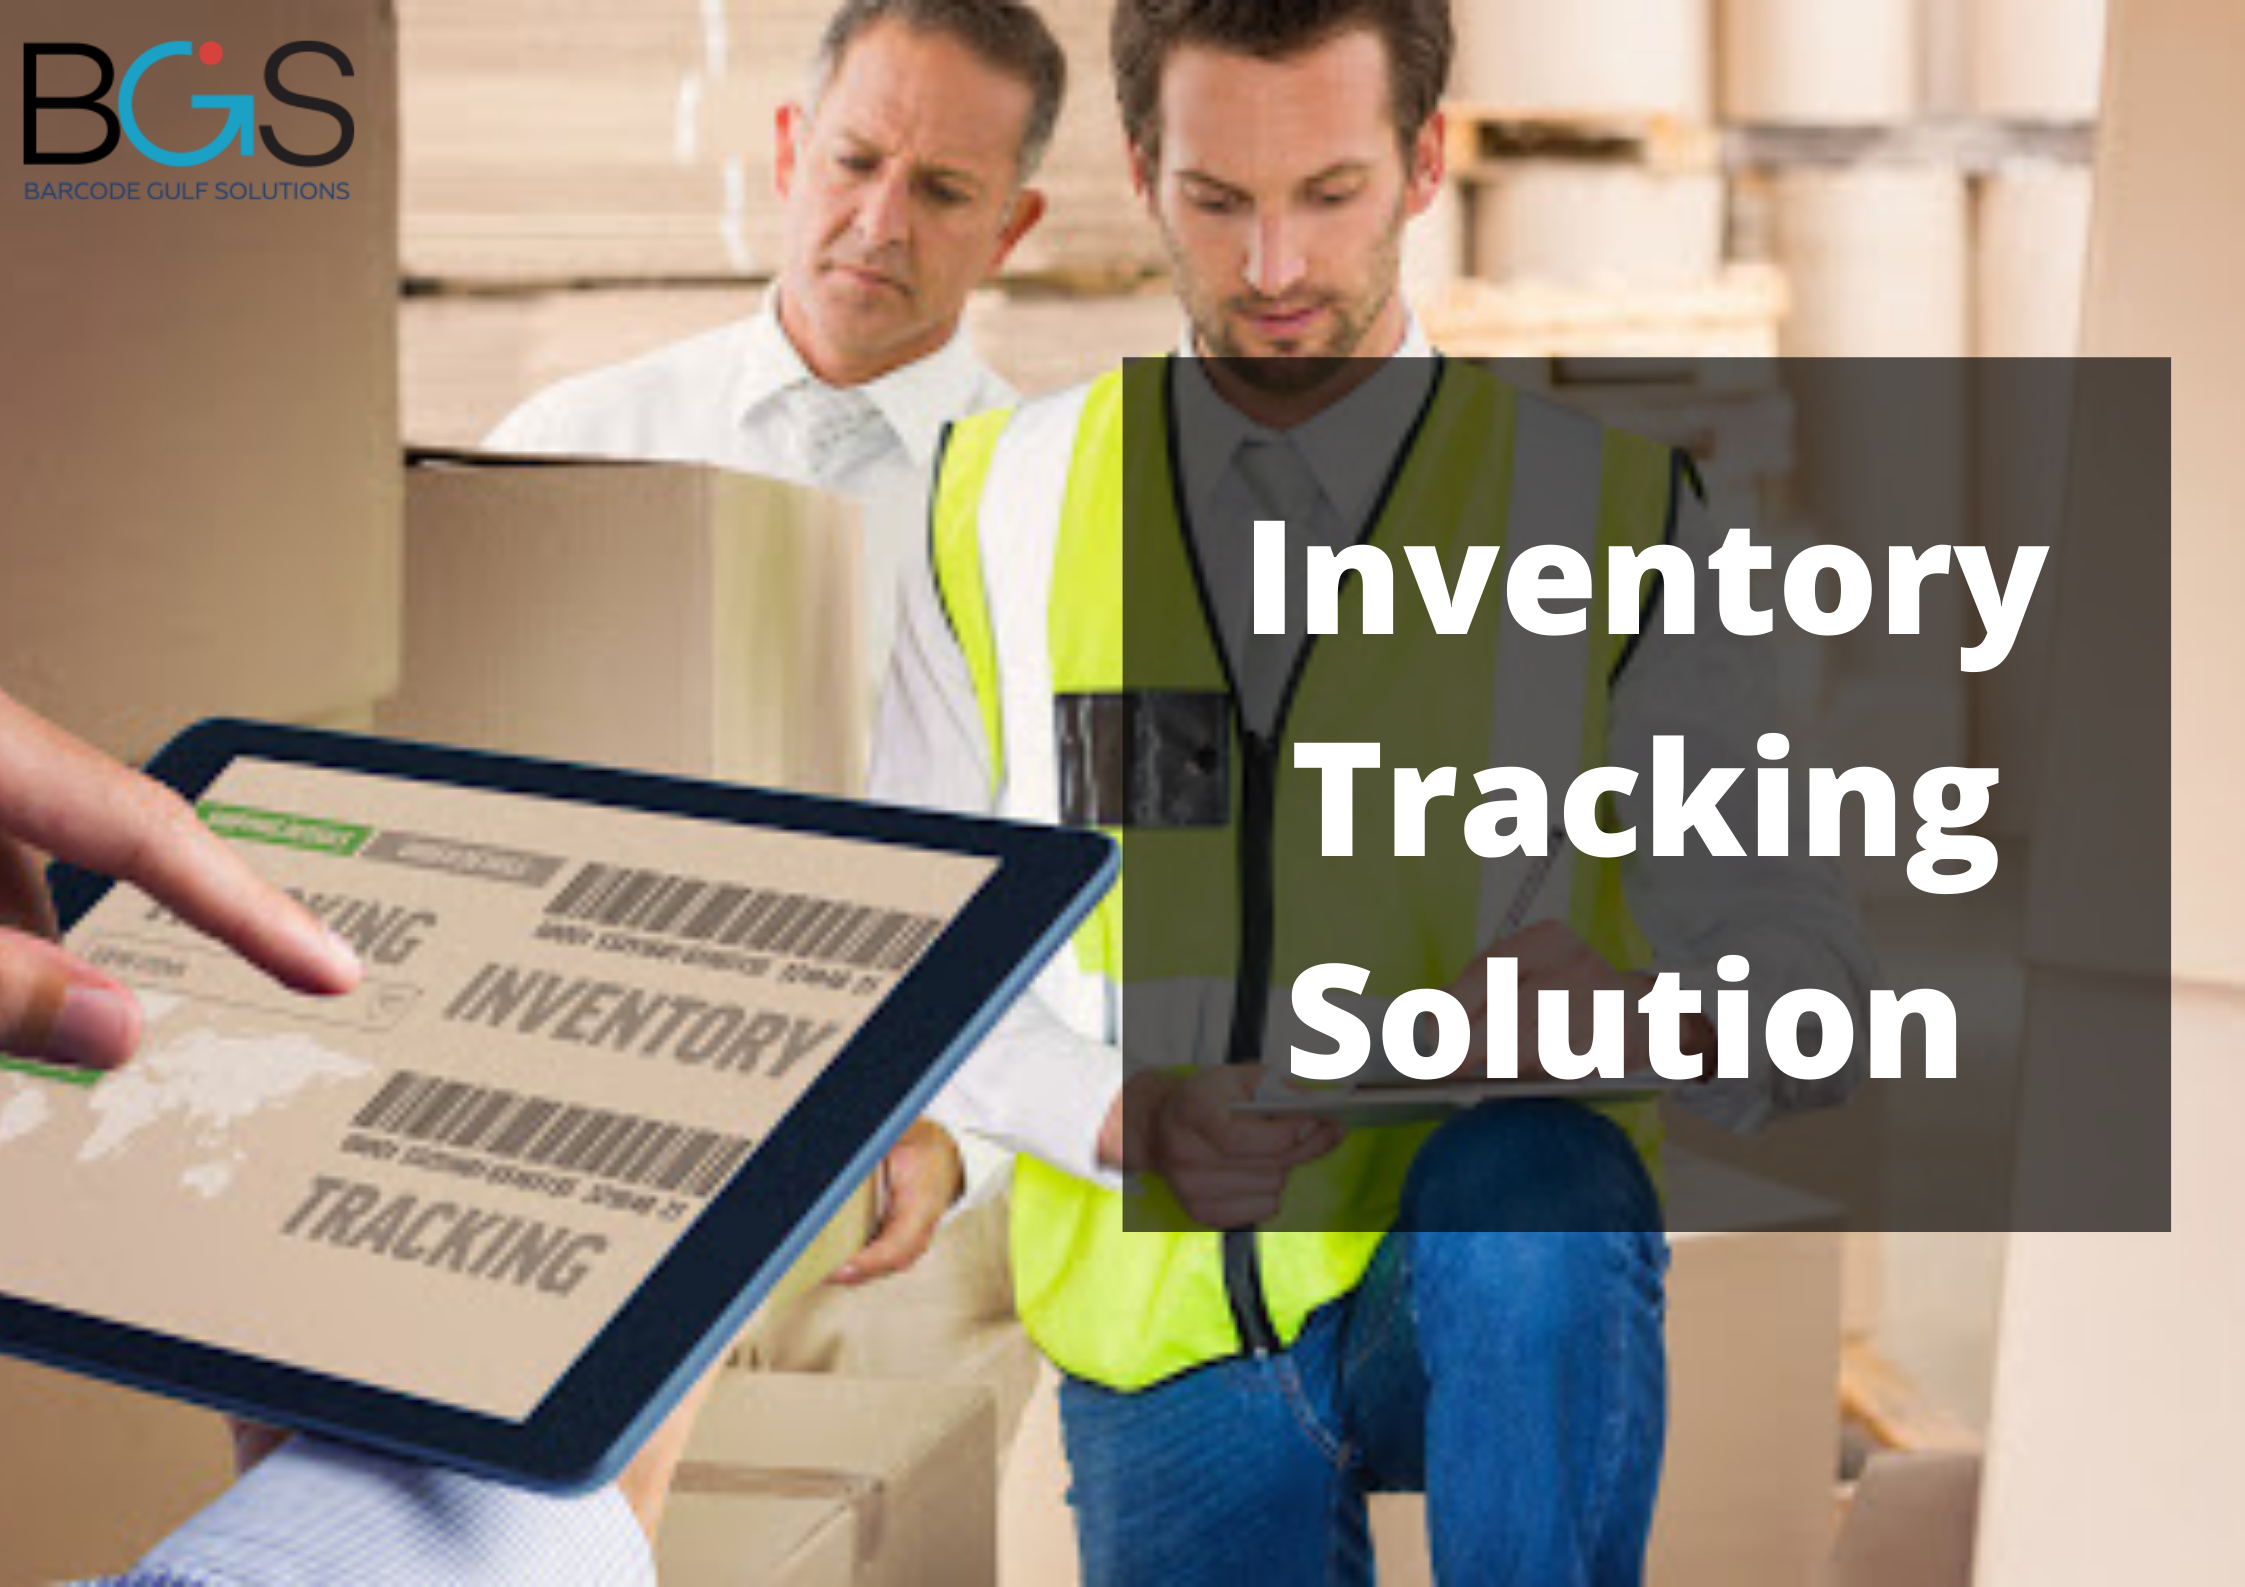 Inventory tracking solution